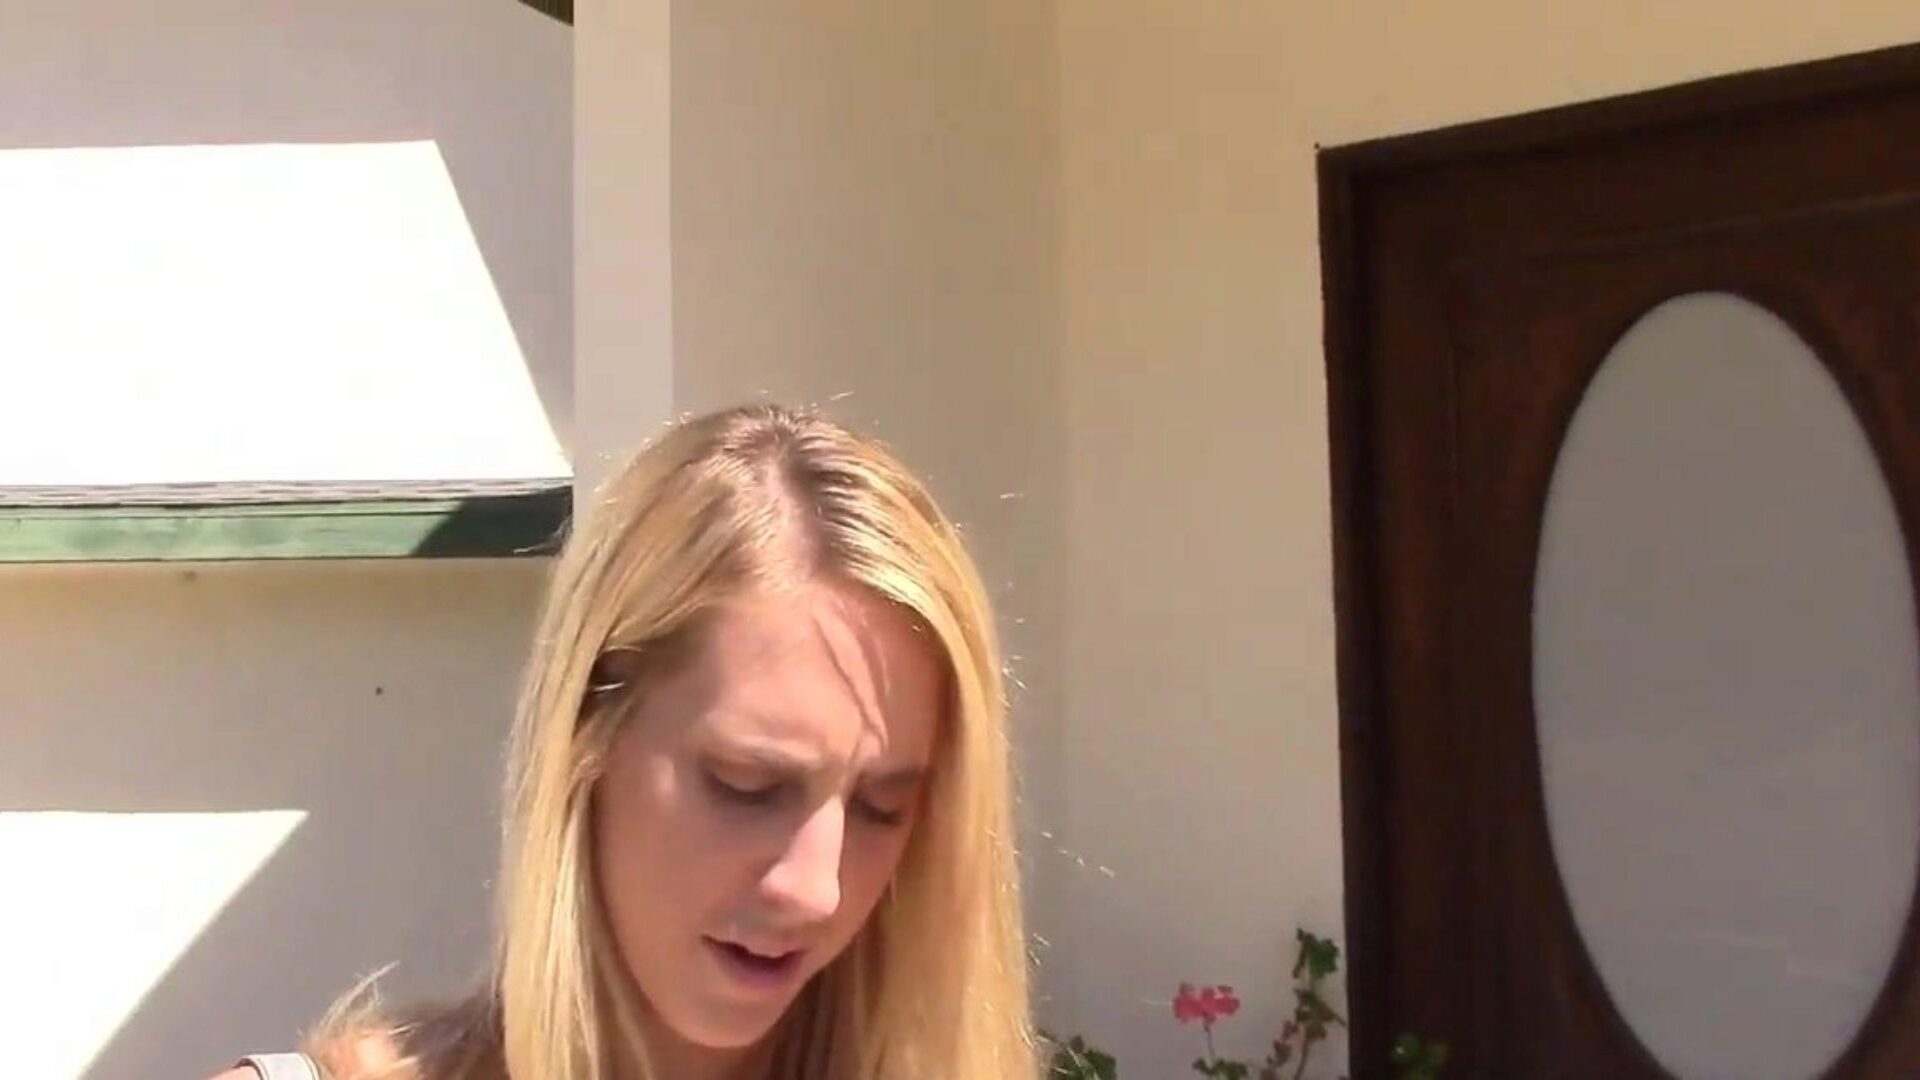 PropertySex - Super priceless wife cheats on her spouse with real estate agent